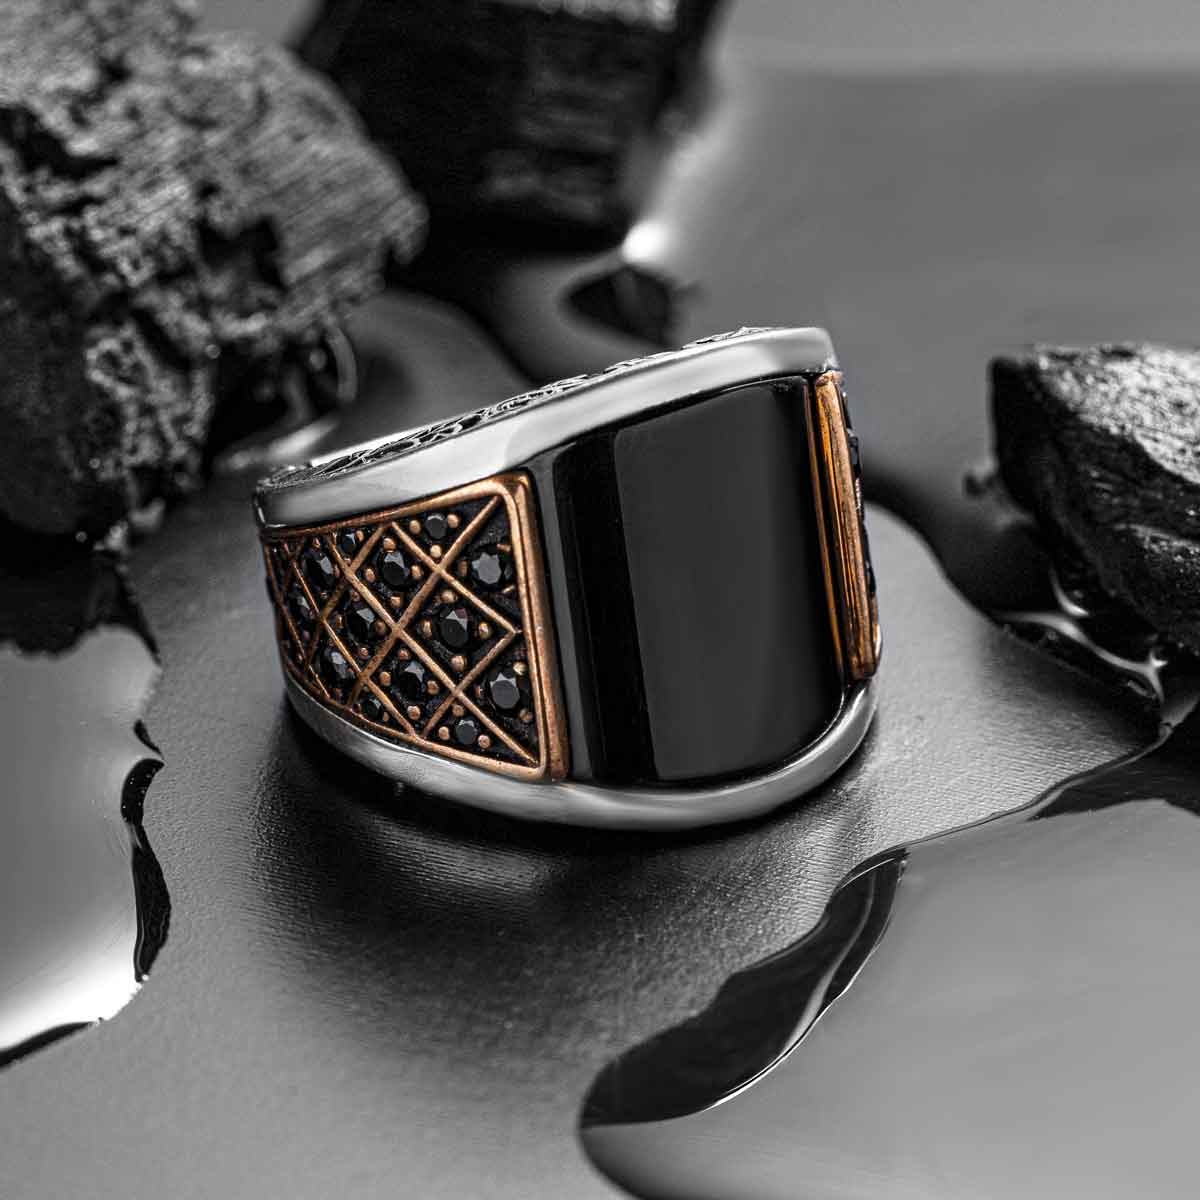 Elysium Ares: Black Diamond 8mm Ring w/ Red Opal Inlay